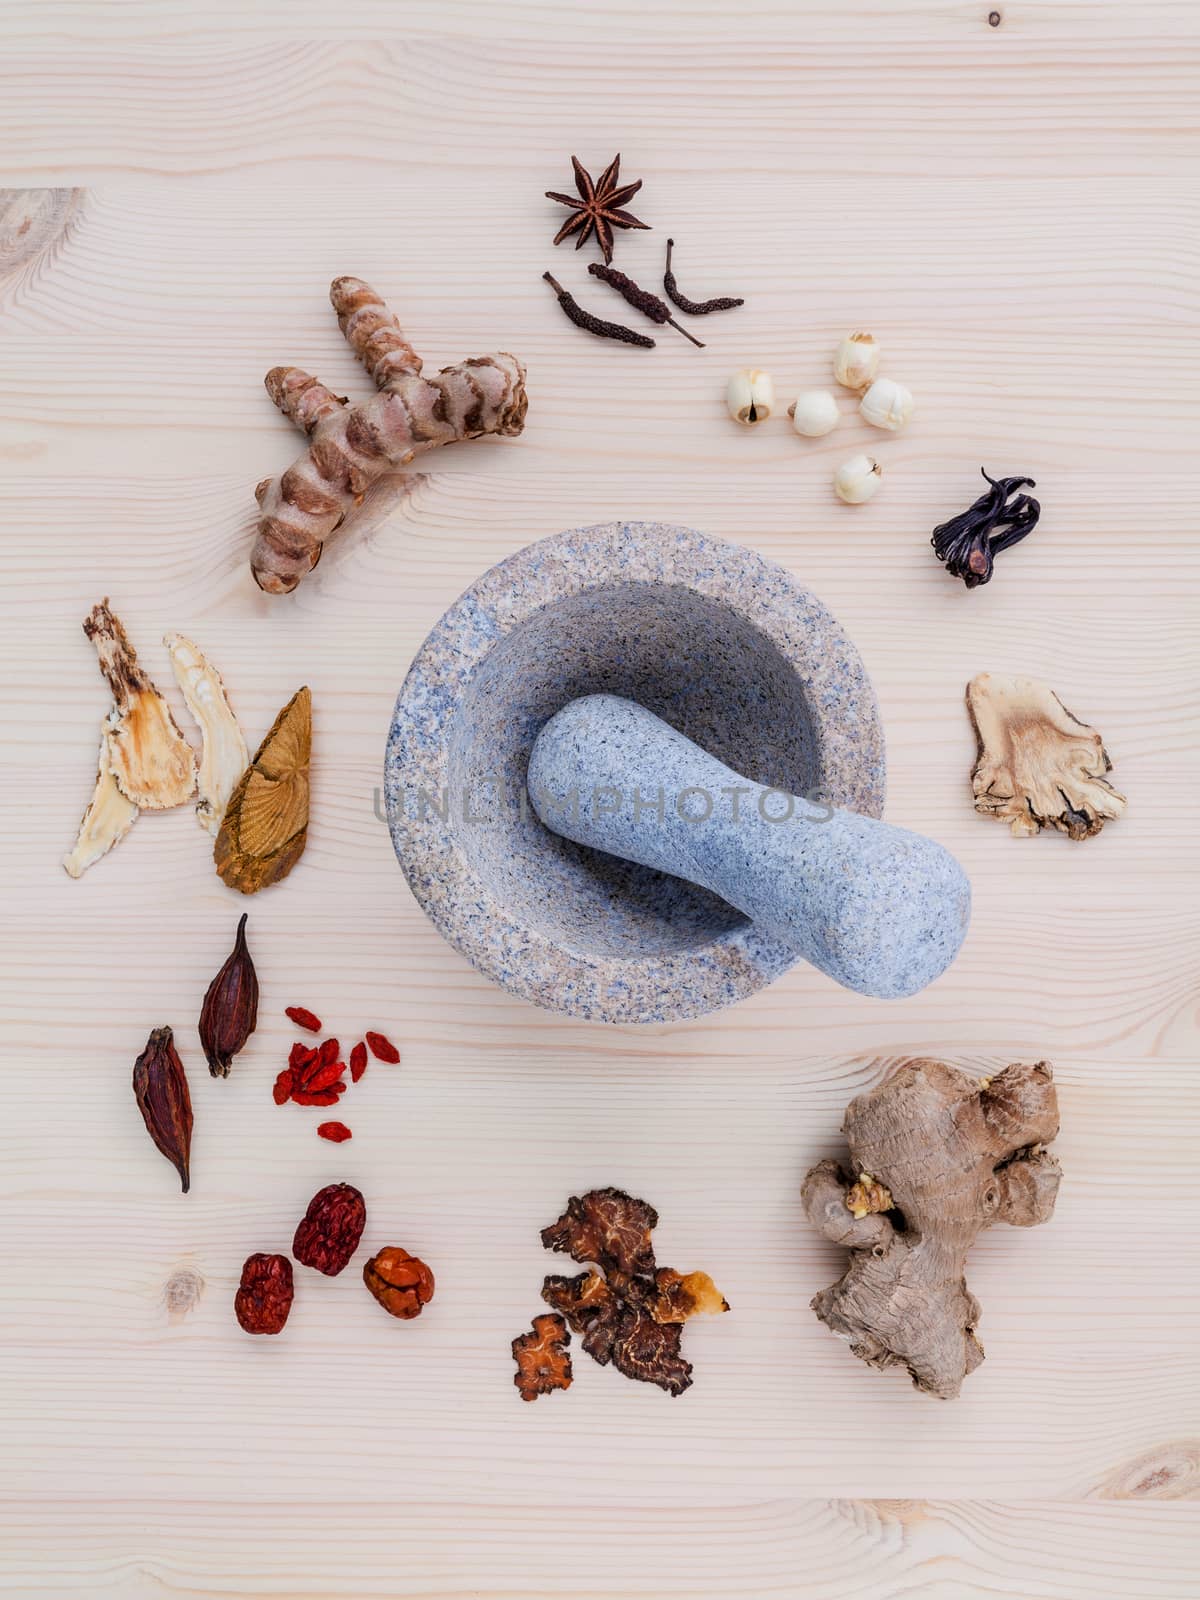 Alternative medicinal dried various Chinese herbs for healthy recipe ginseng ,goji berry ,ginger ,turmeric ,lotus seed ,star anise ,monkey apple and long pepper with mortar on wooden background.